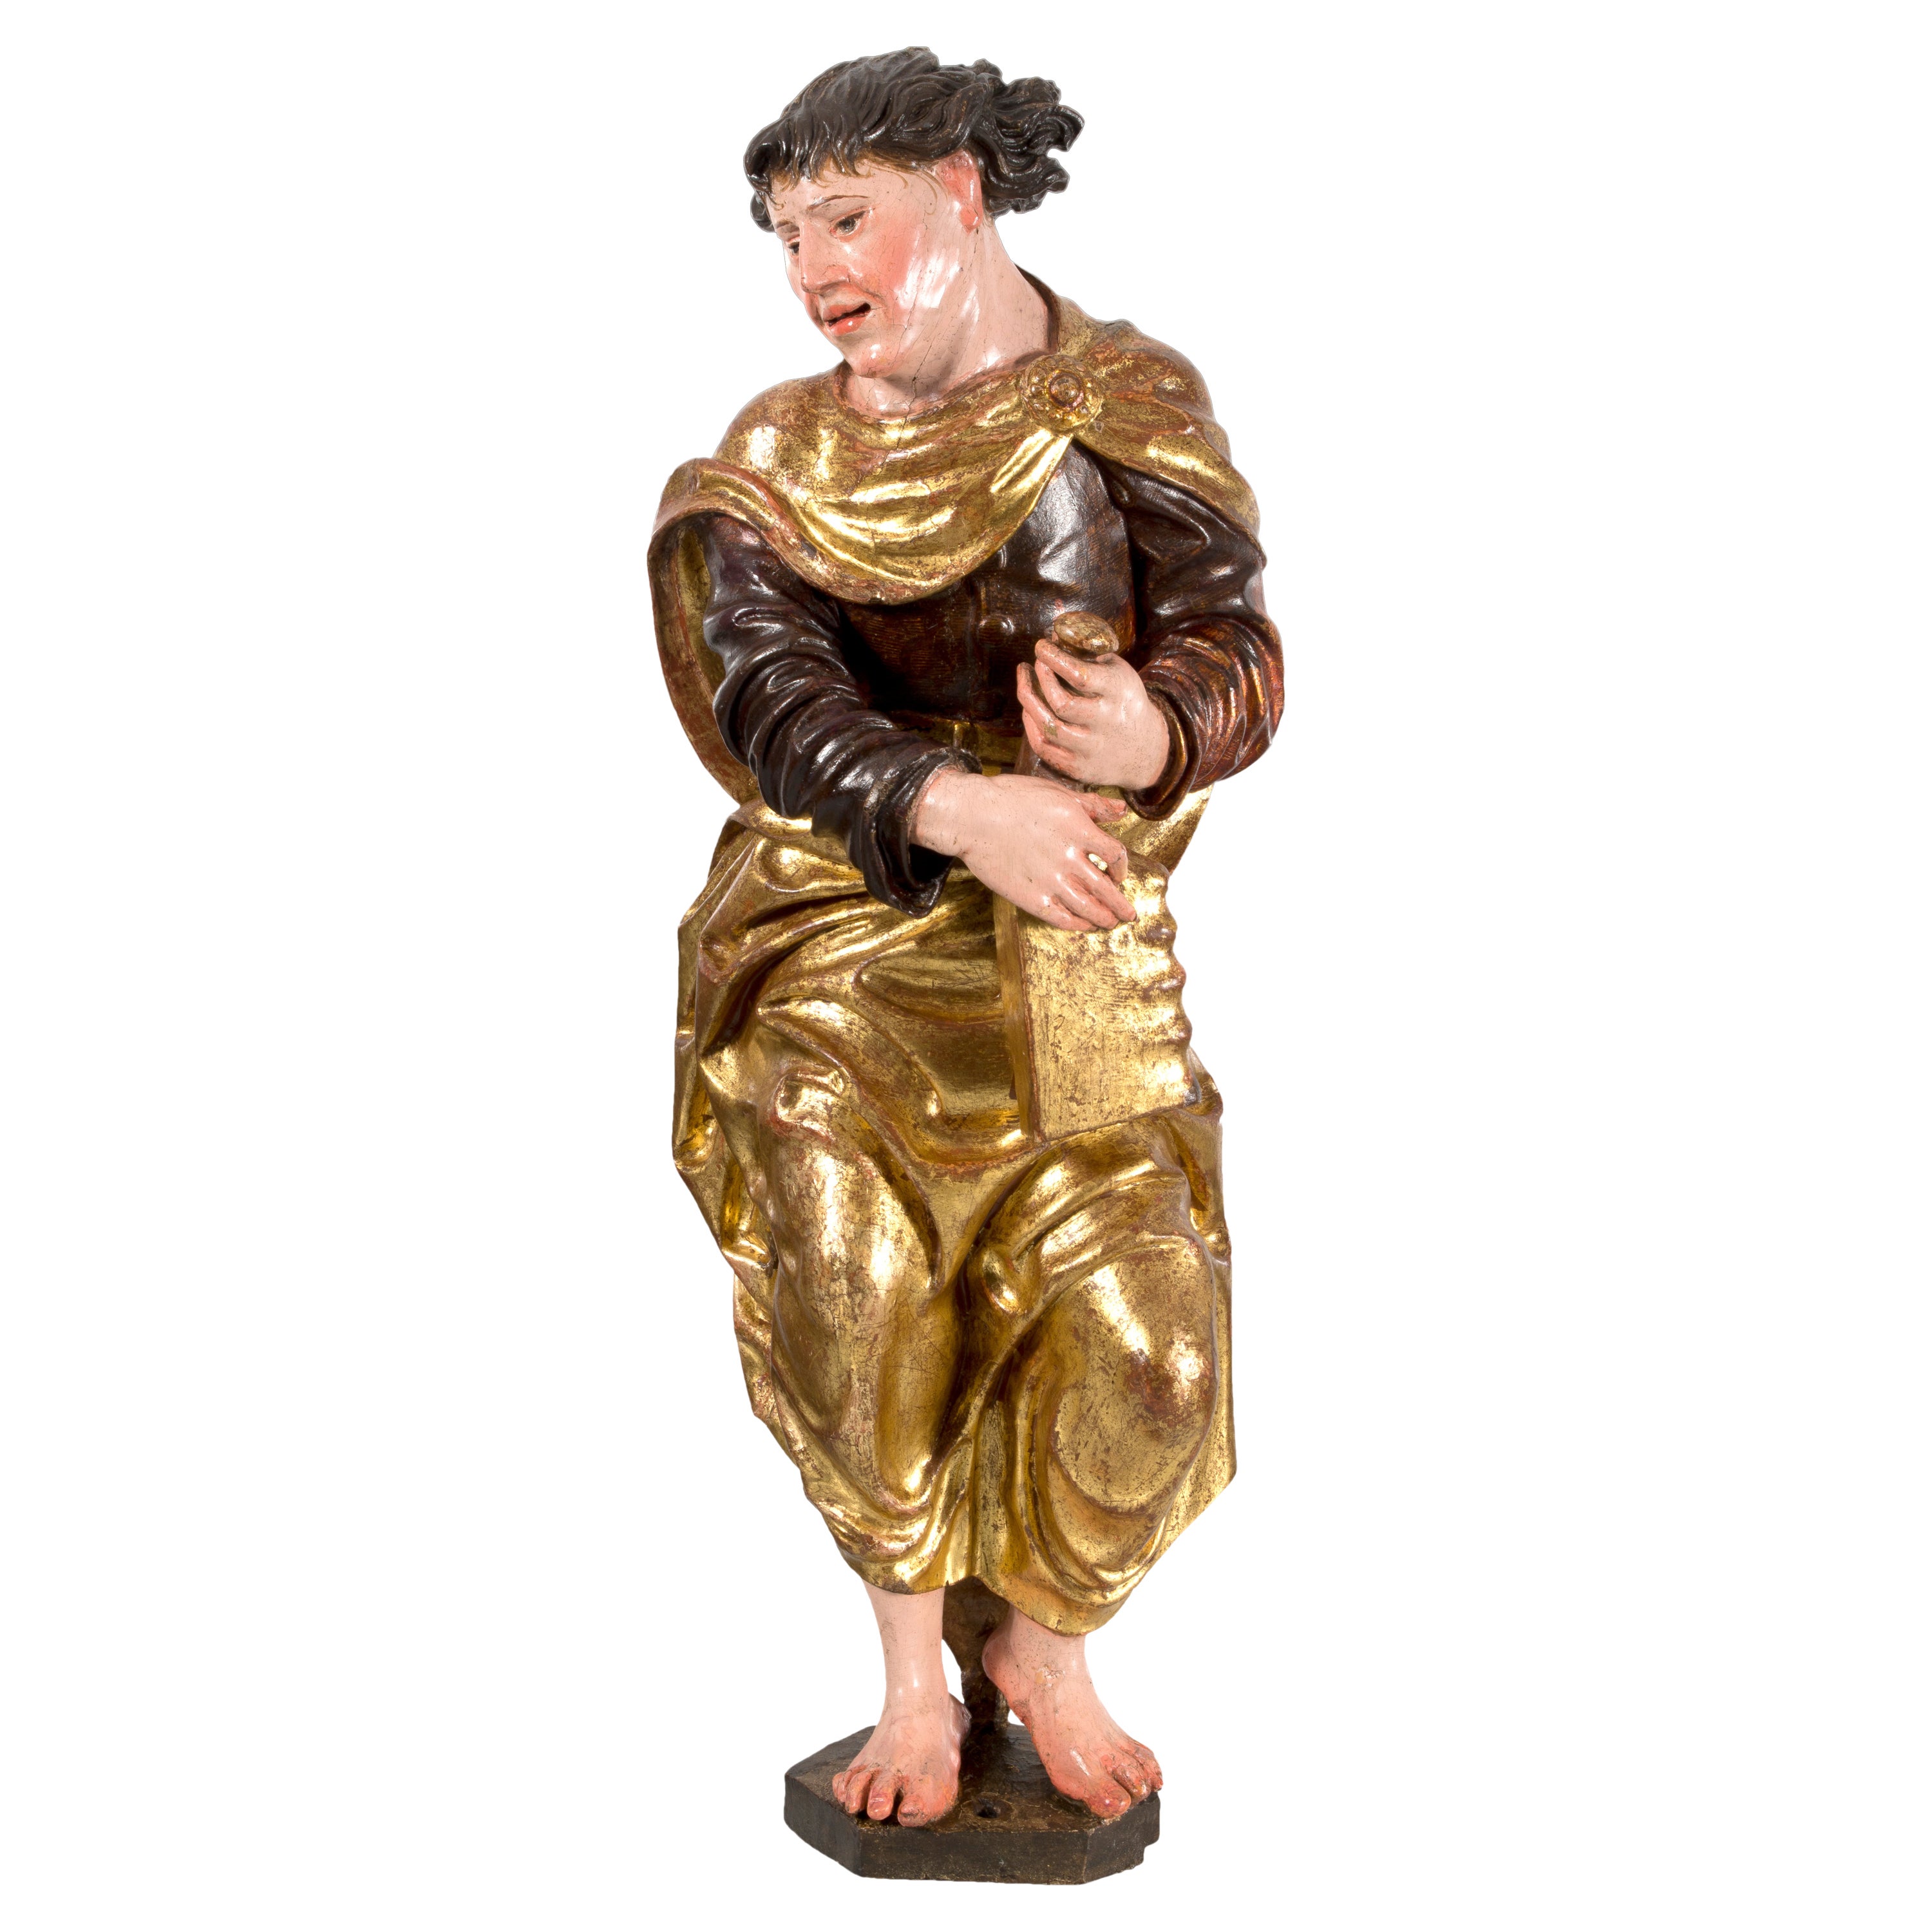 Sculpture in Gilded and Polychrome Wood, "Evangelist", Berruguete's Environment